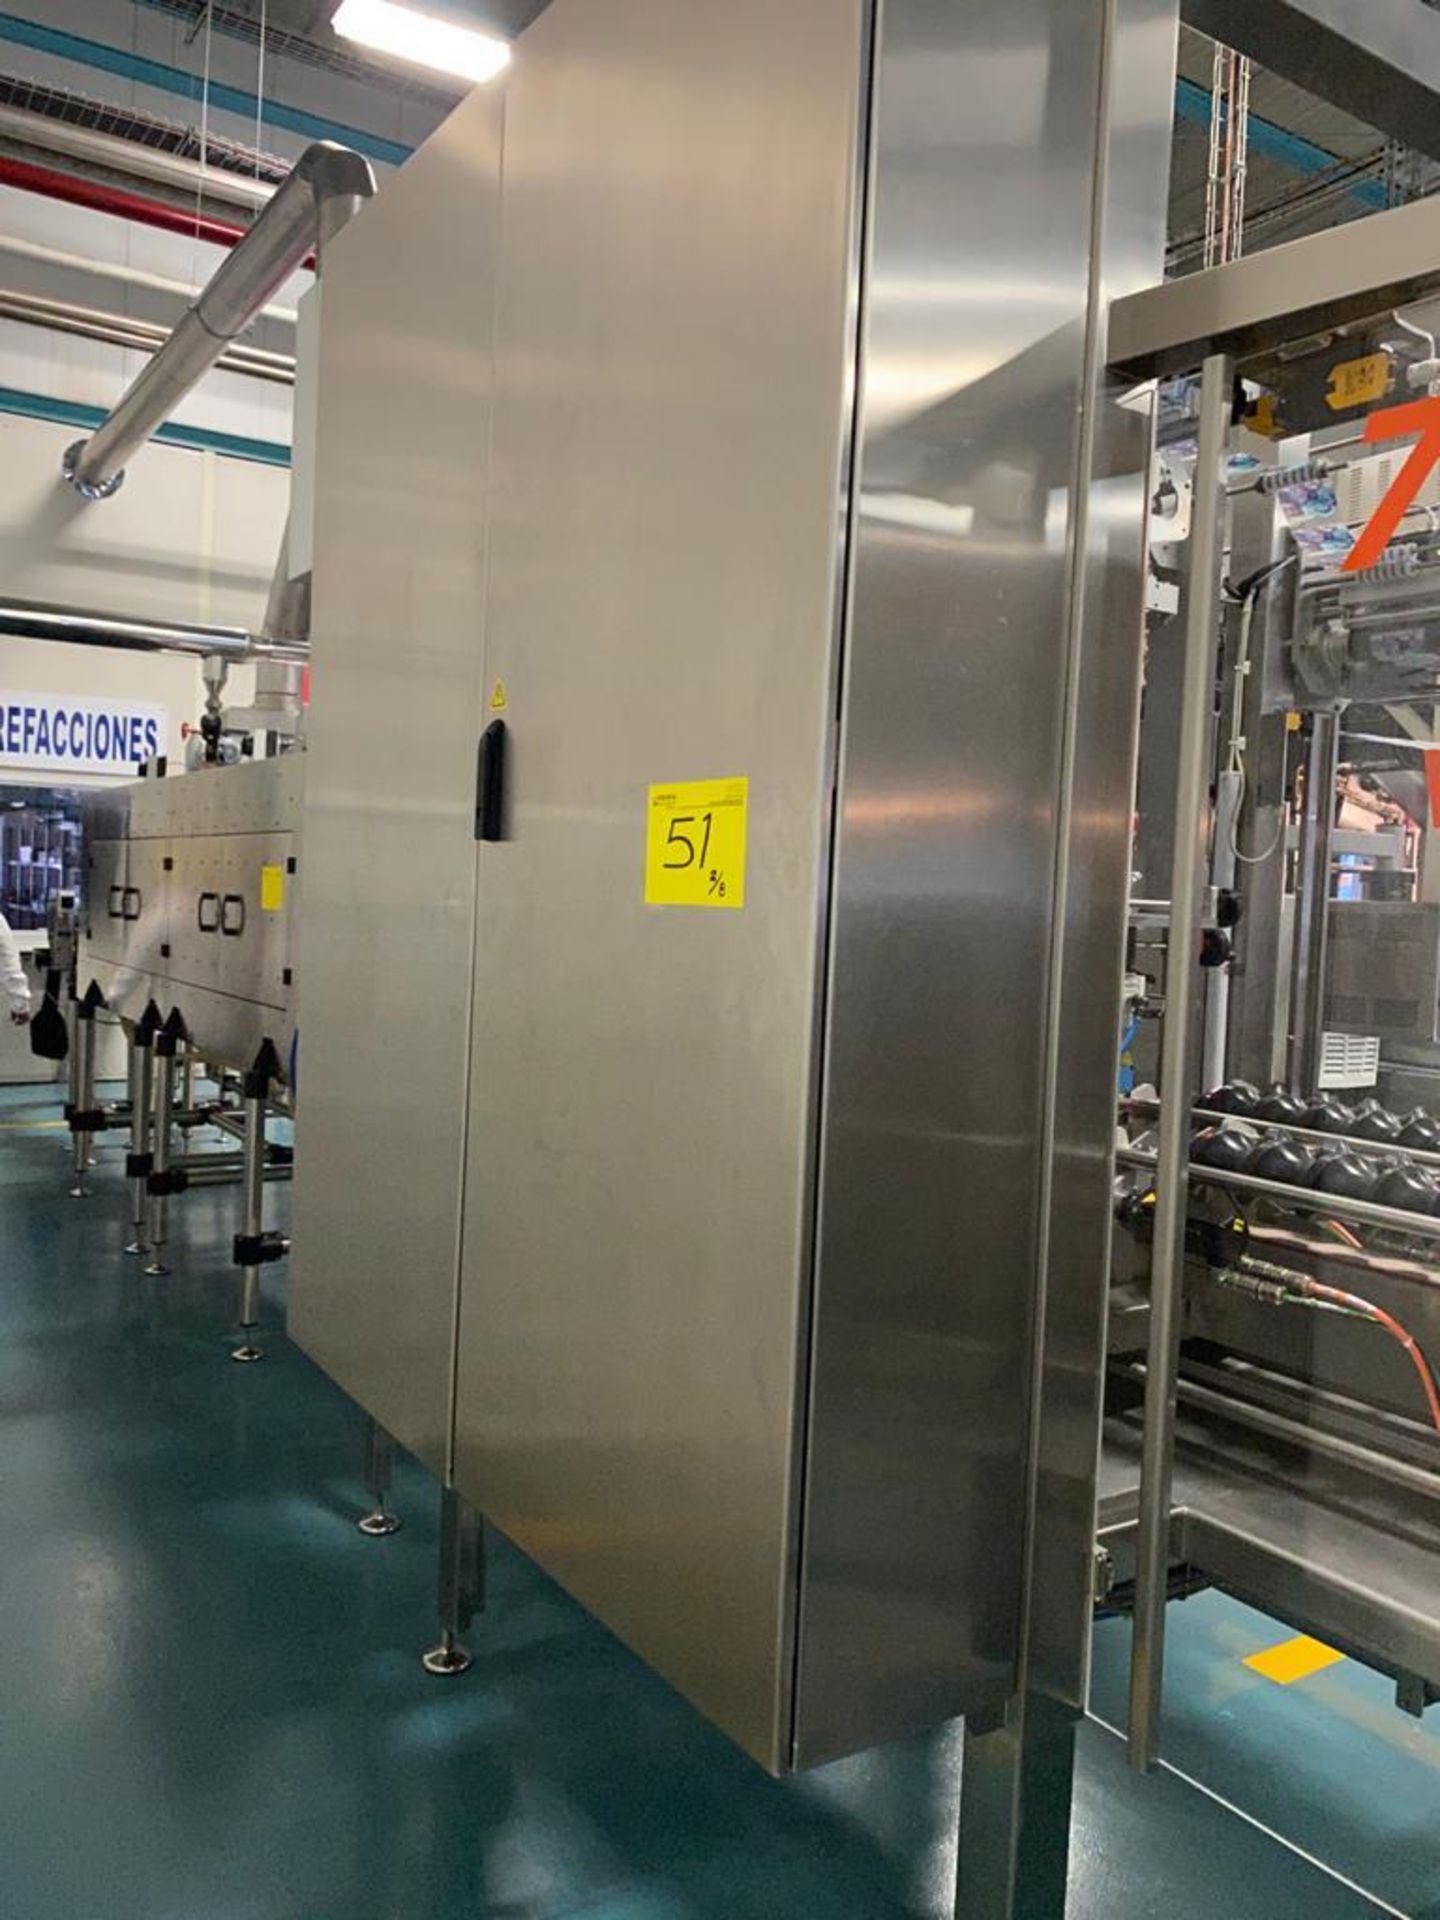 2019 Sleeve Technology Shrink Sleeve Labeling Line, S/N1902079, Consist of Bottle Air Drying Tunnel - Image 32 of 50